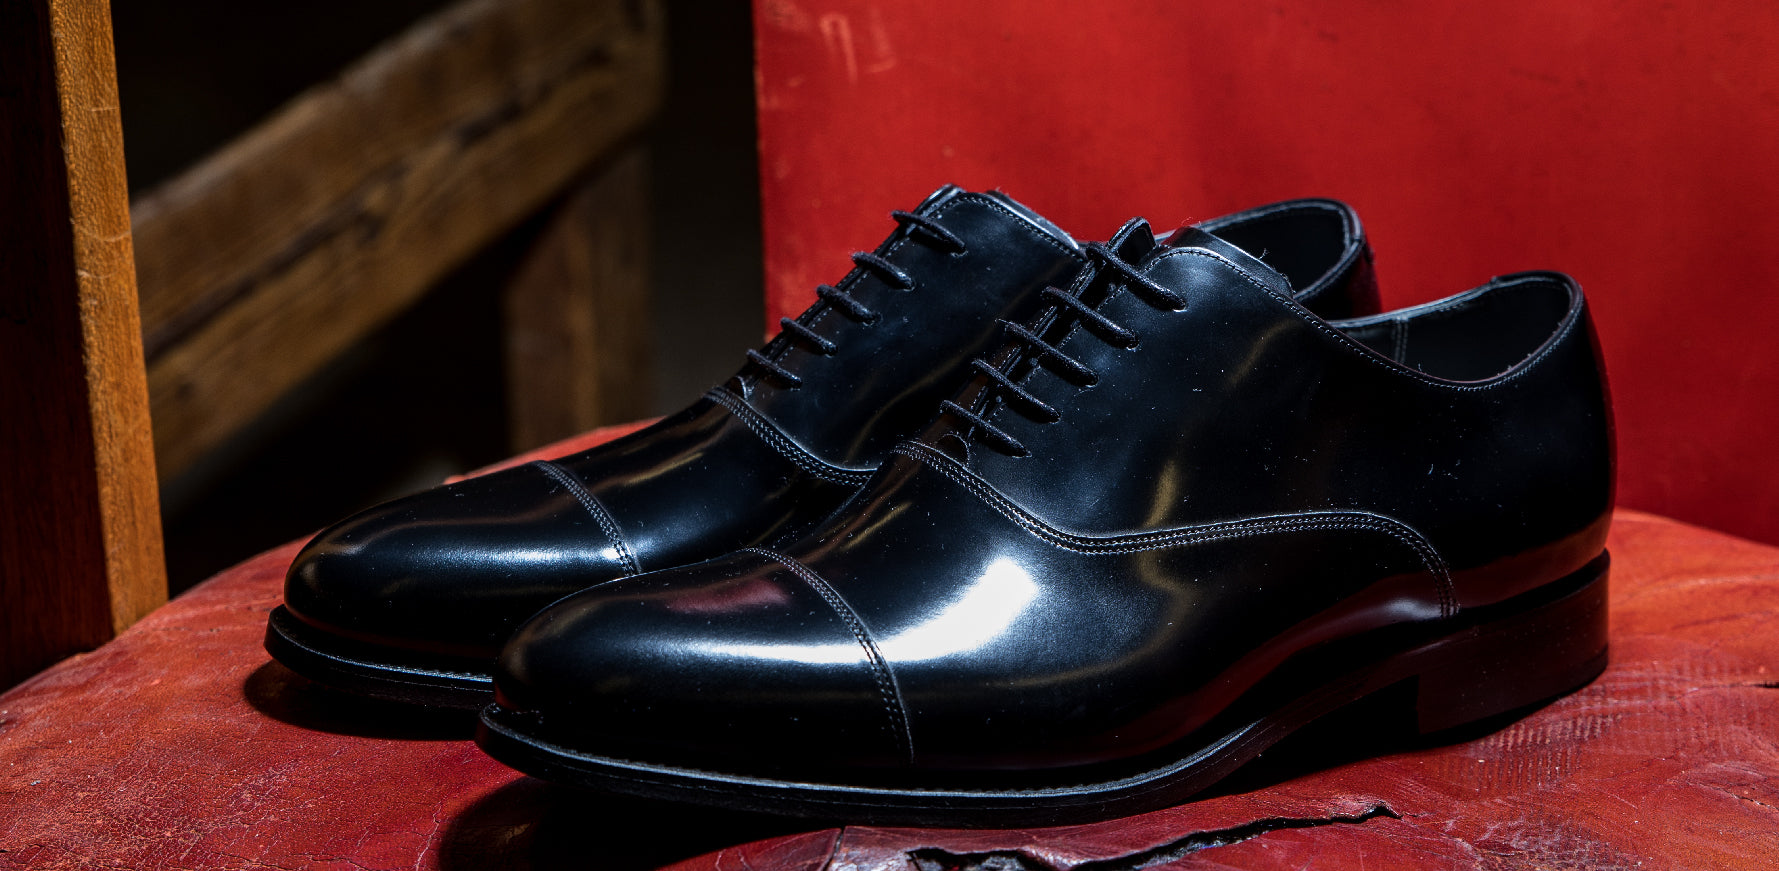 Winsford - Men's Black Leather Oxford Shoes By Barker